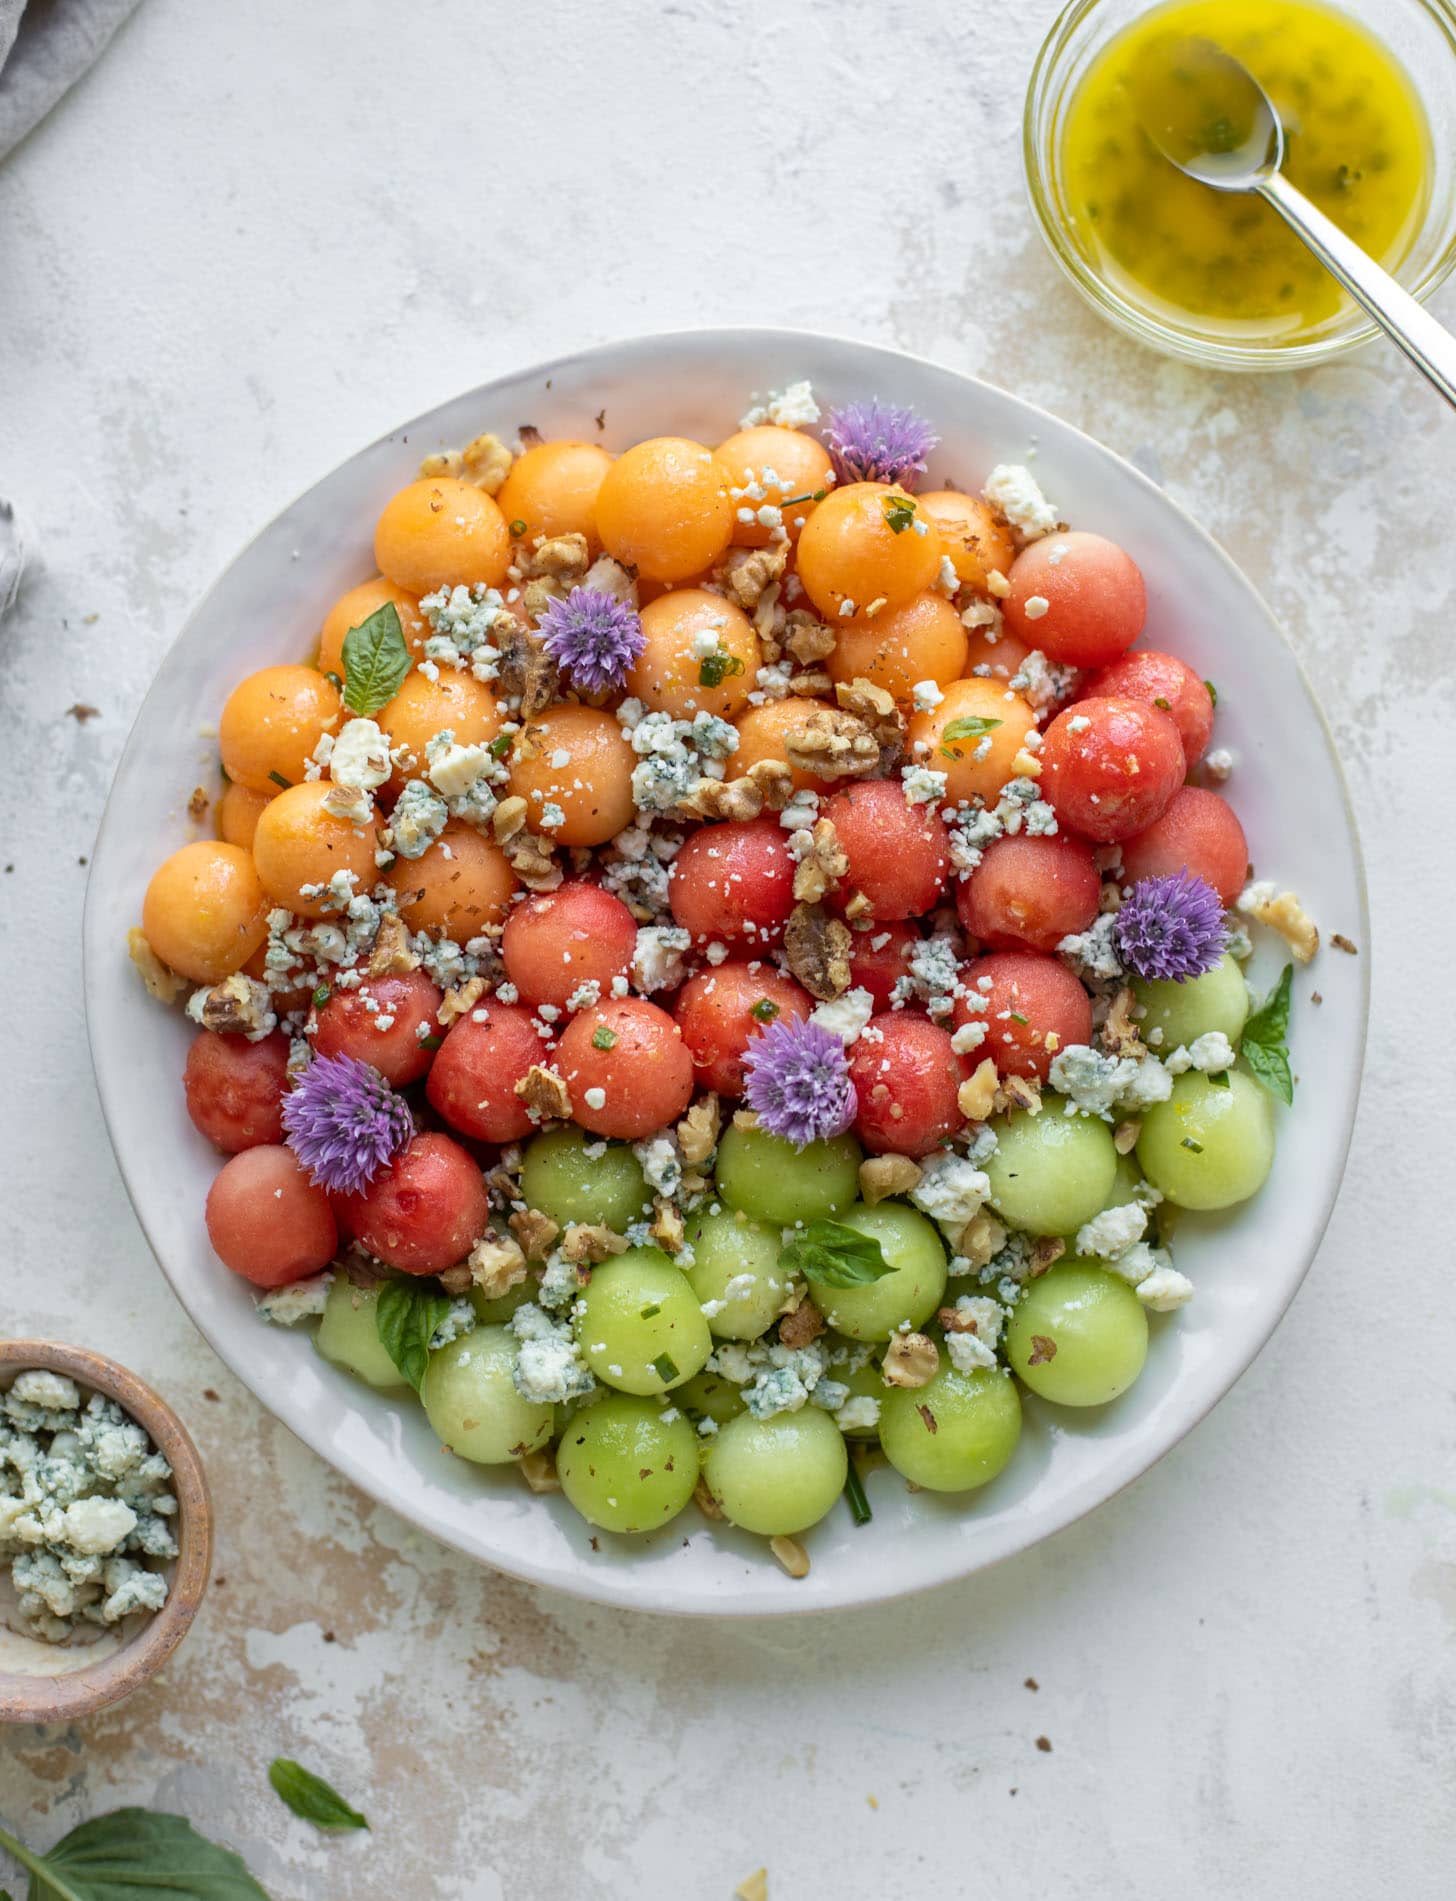 triple melon ball salad with blue cheese and walnuts